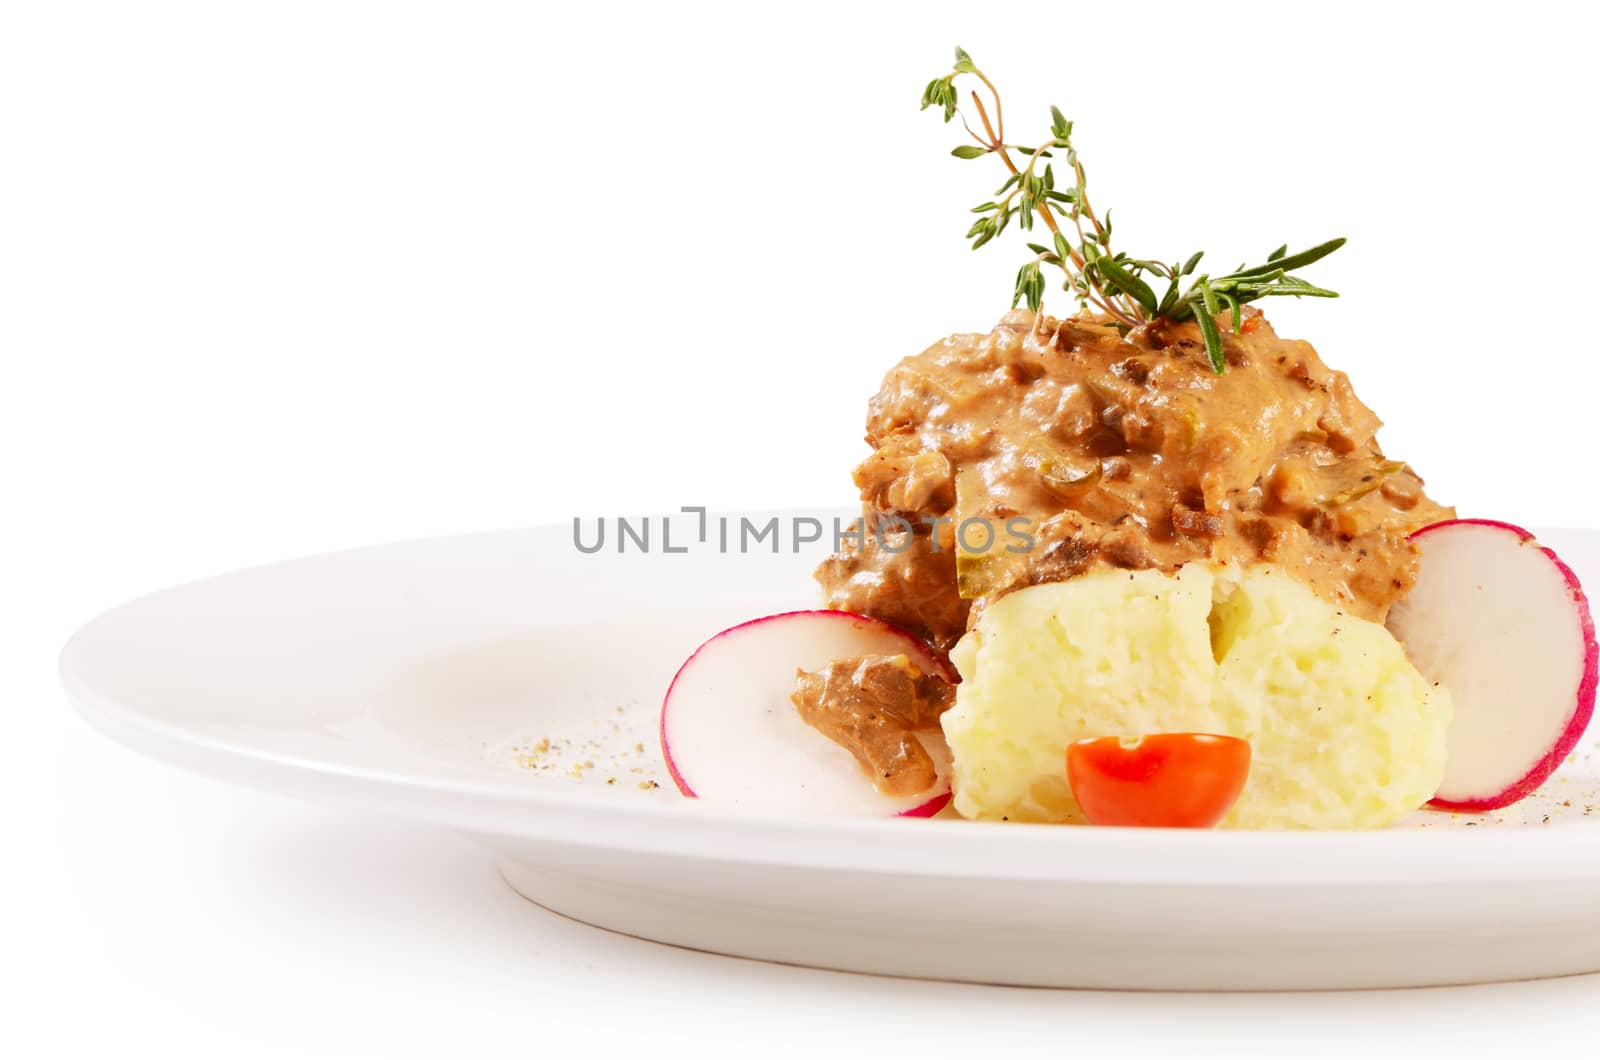 Potatoes with gravy, vegetables and meat isolated